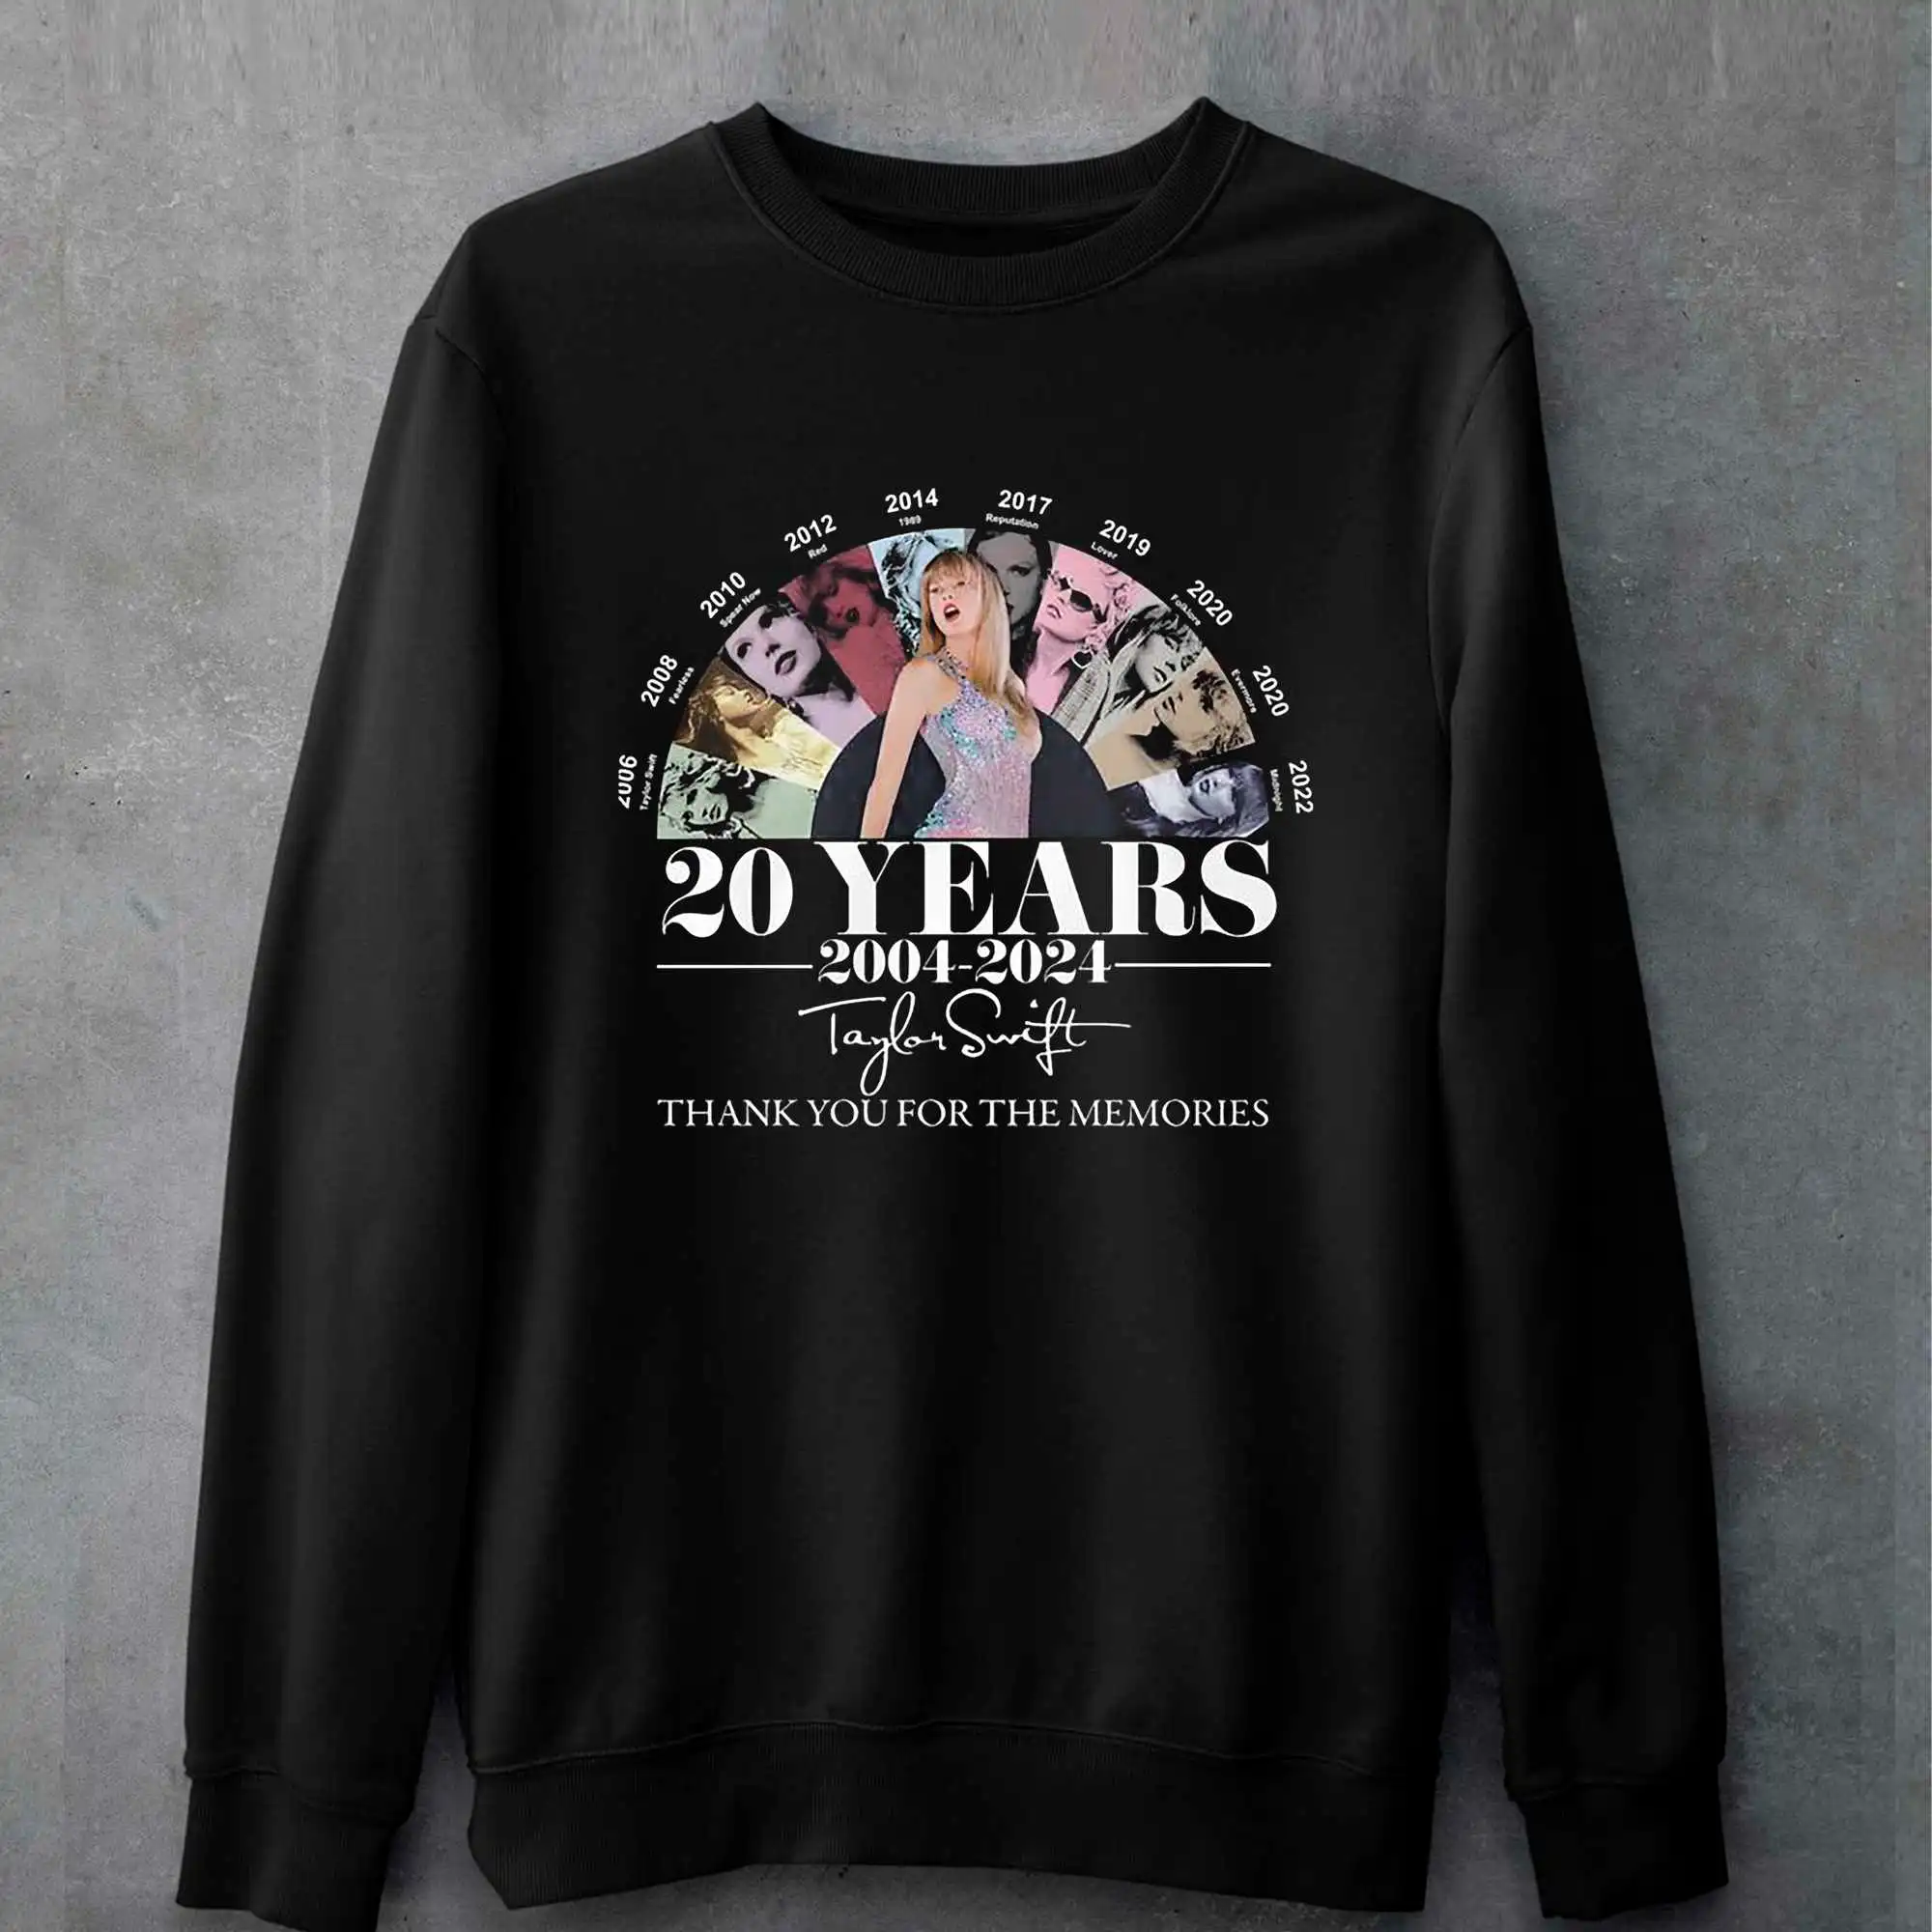 20 Years 2004 2024 Taylor Swift Thank You For The Memories Shirt